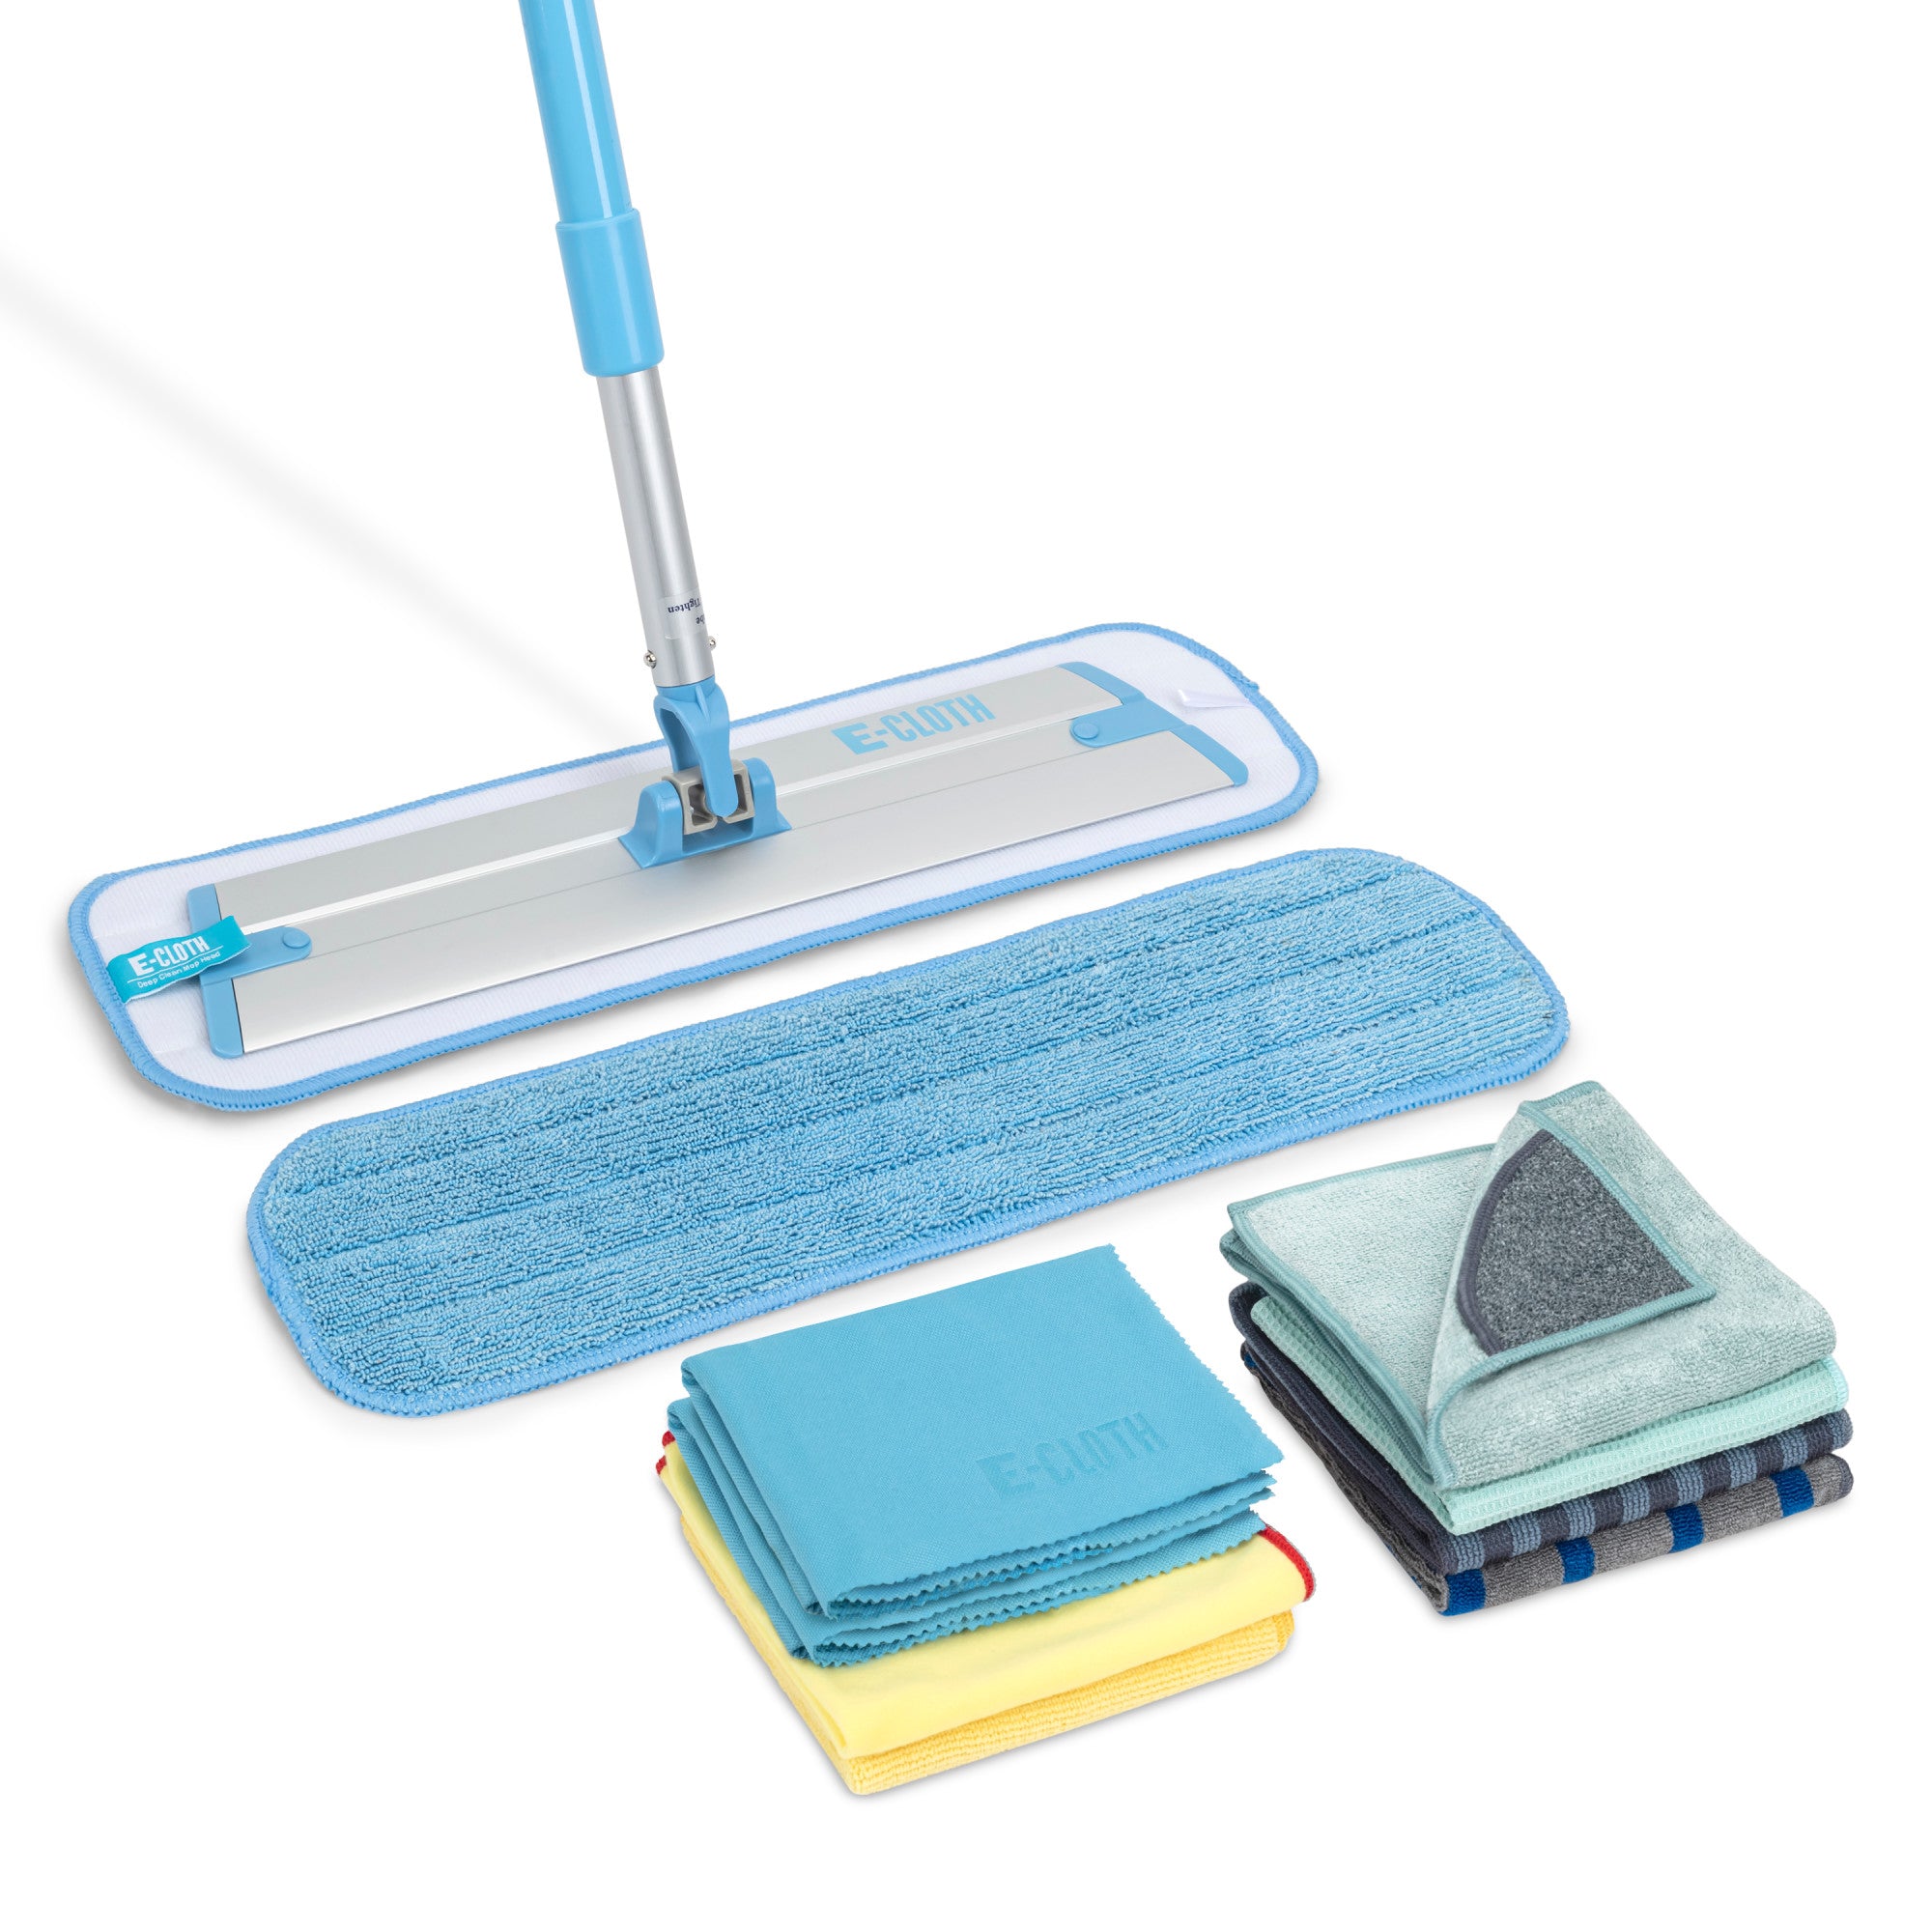 Oreck Deep Cleaning Hard Floor Wet Mop, with Microfiber Head by E-CLOTH, AK51000, Blue